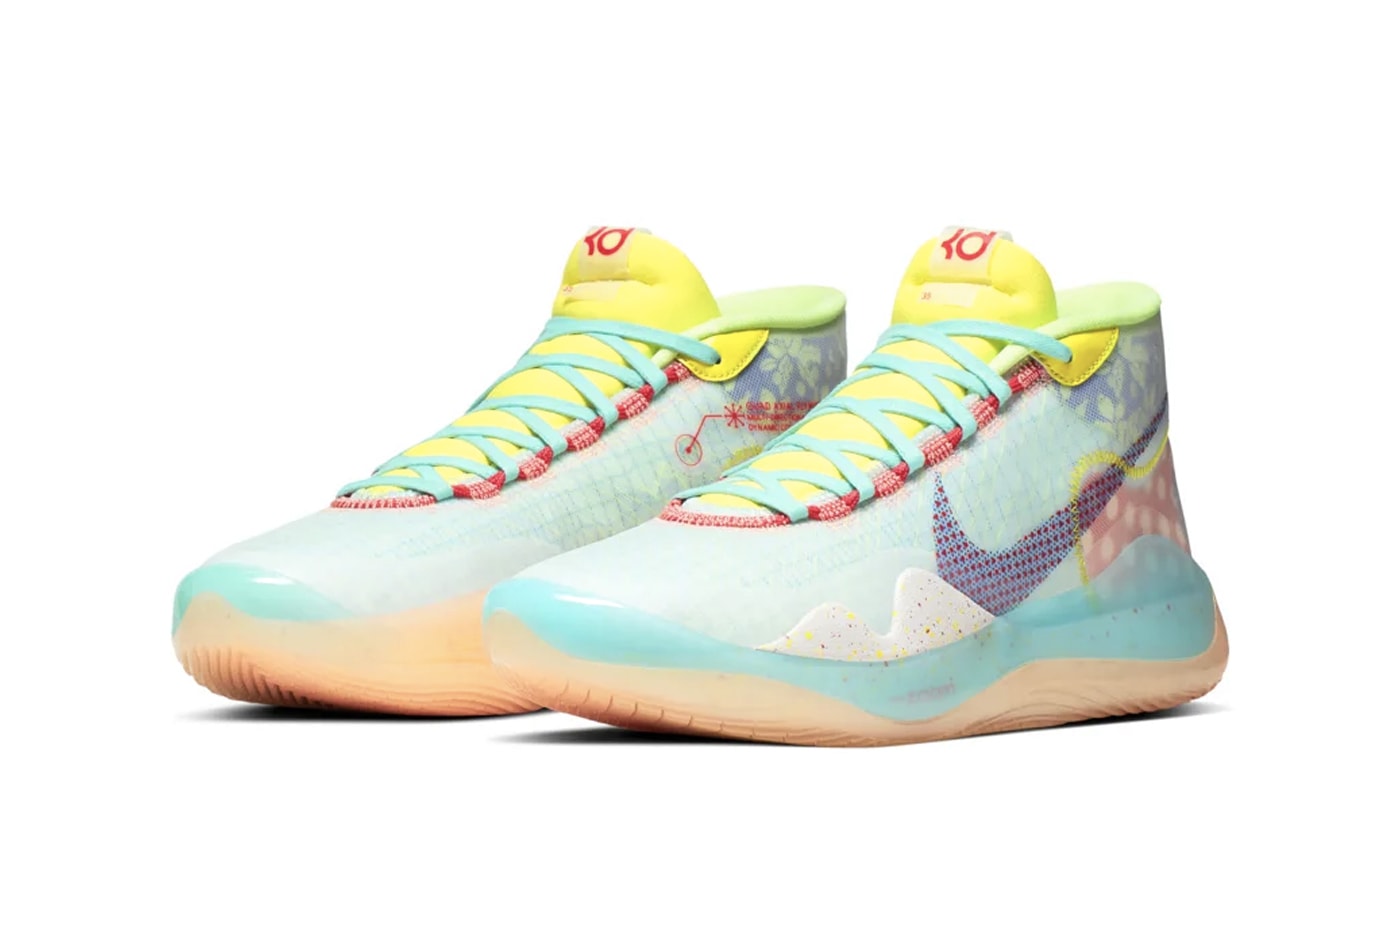 Nike Zoom KD12 NRG EP "Peach Jam" Release Drop date price teal peach colorway snkrs app kevin durant